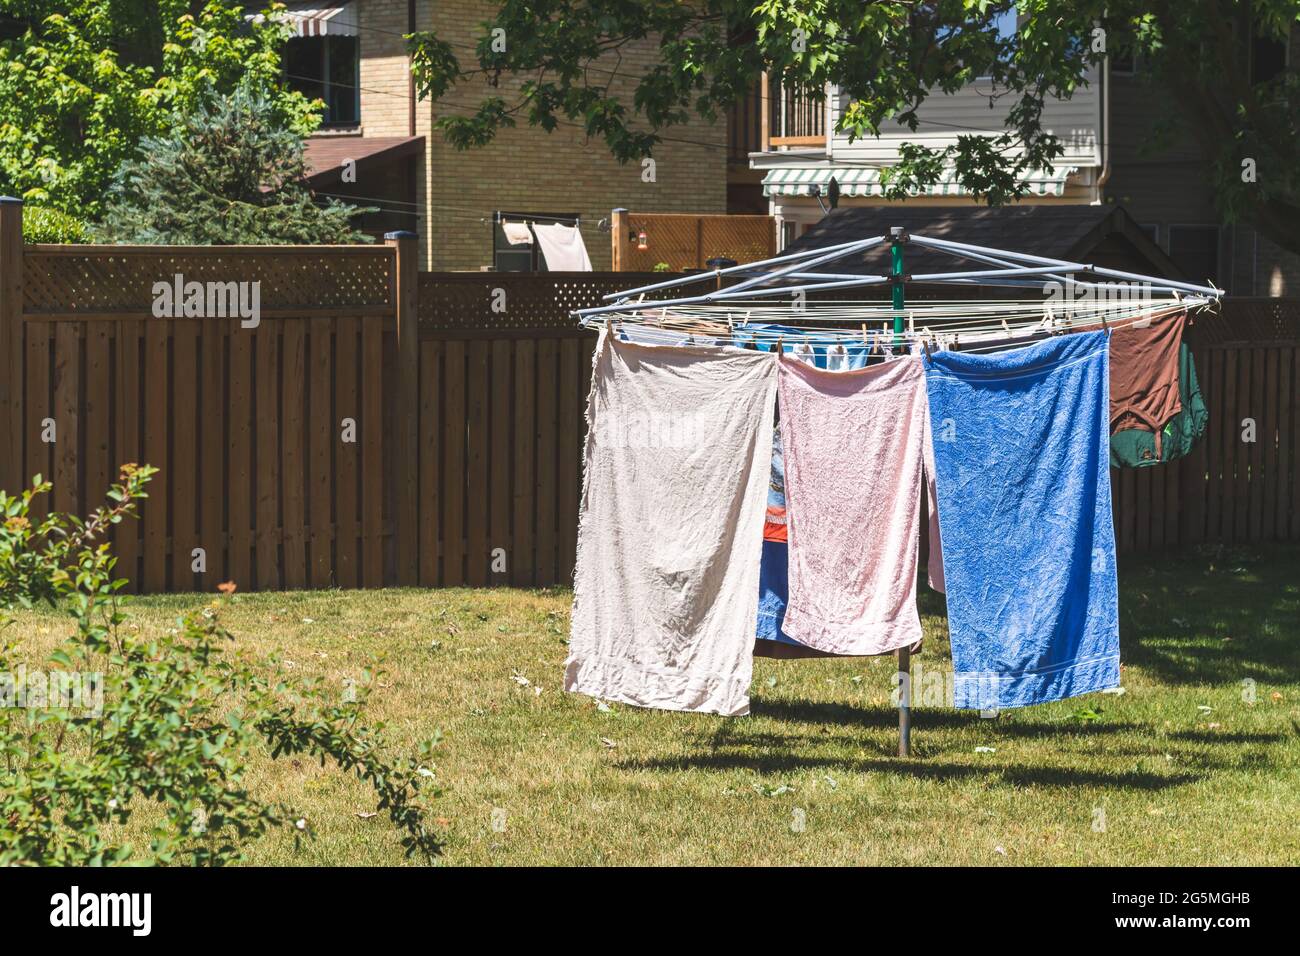 Metal outdoor clothes drying rack with towels and a shirt drying on it. On backyard lawn. Vintage filter. Stock Photo